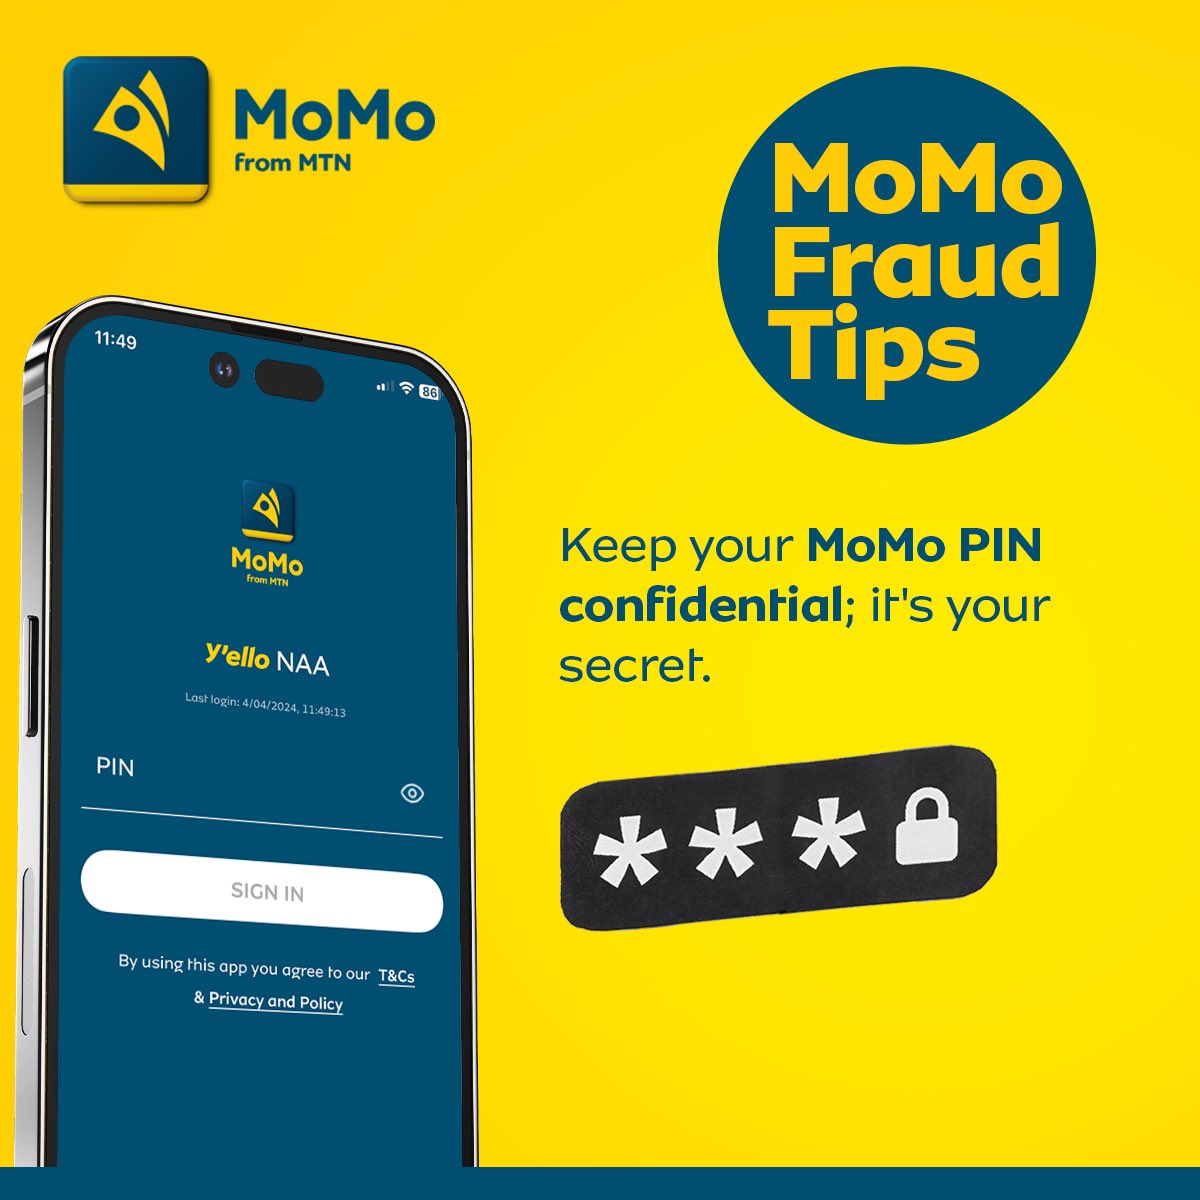 Keep your MoMo PIN confidential; it's your secret. #MoMoFraudTips